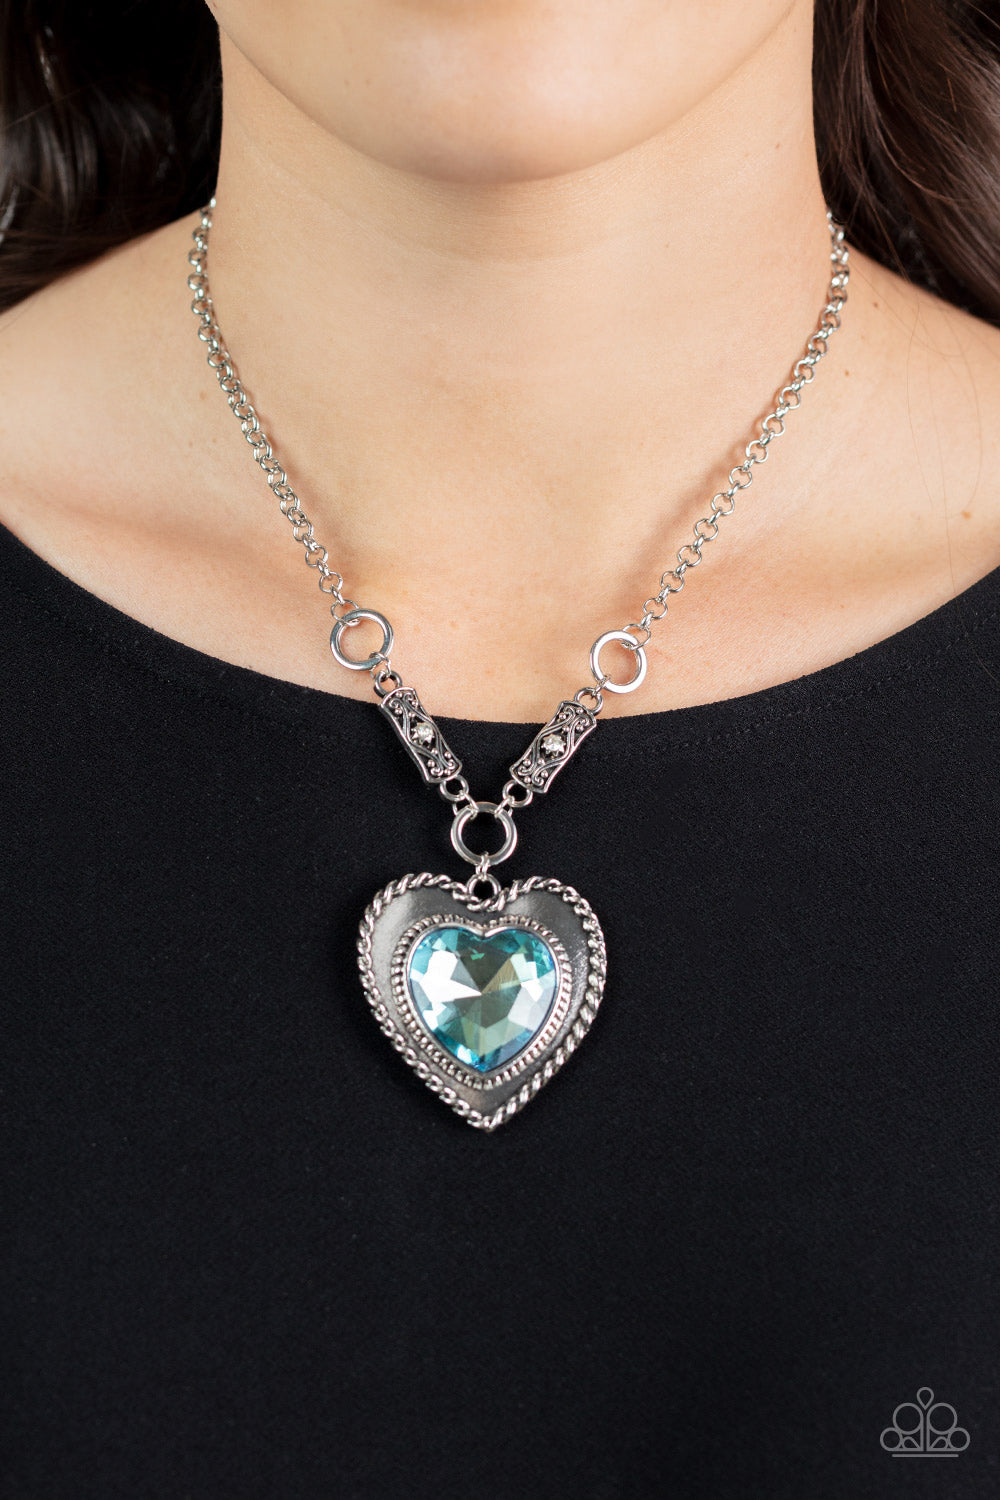 Paparazzi Accessories - Heart Full of Fabulous #N244 Box 3 - Blue Necklace